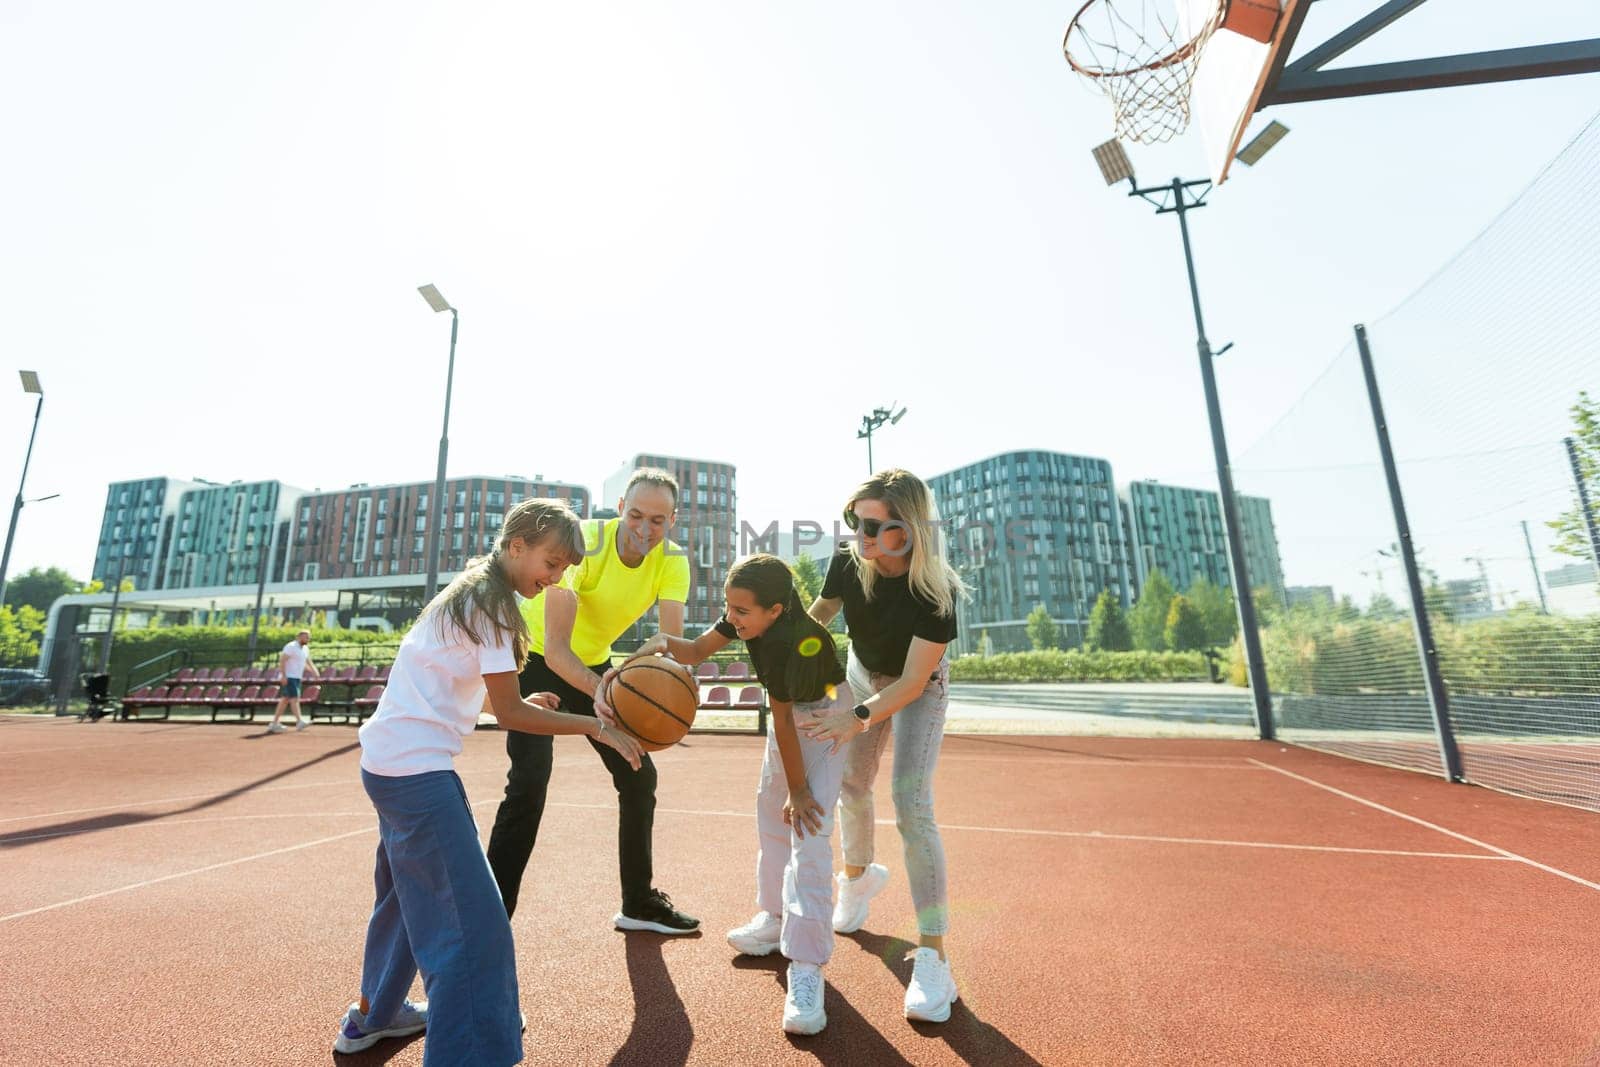 summer holidays, sport and people concept - happy family with ball playing on basketball playground. High quality photo